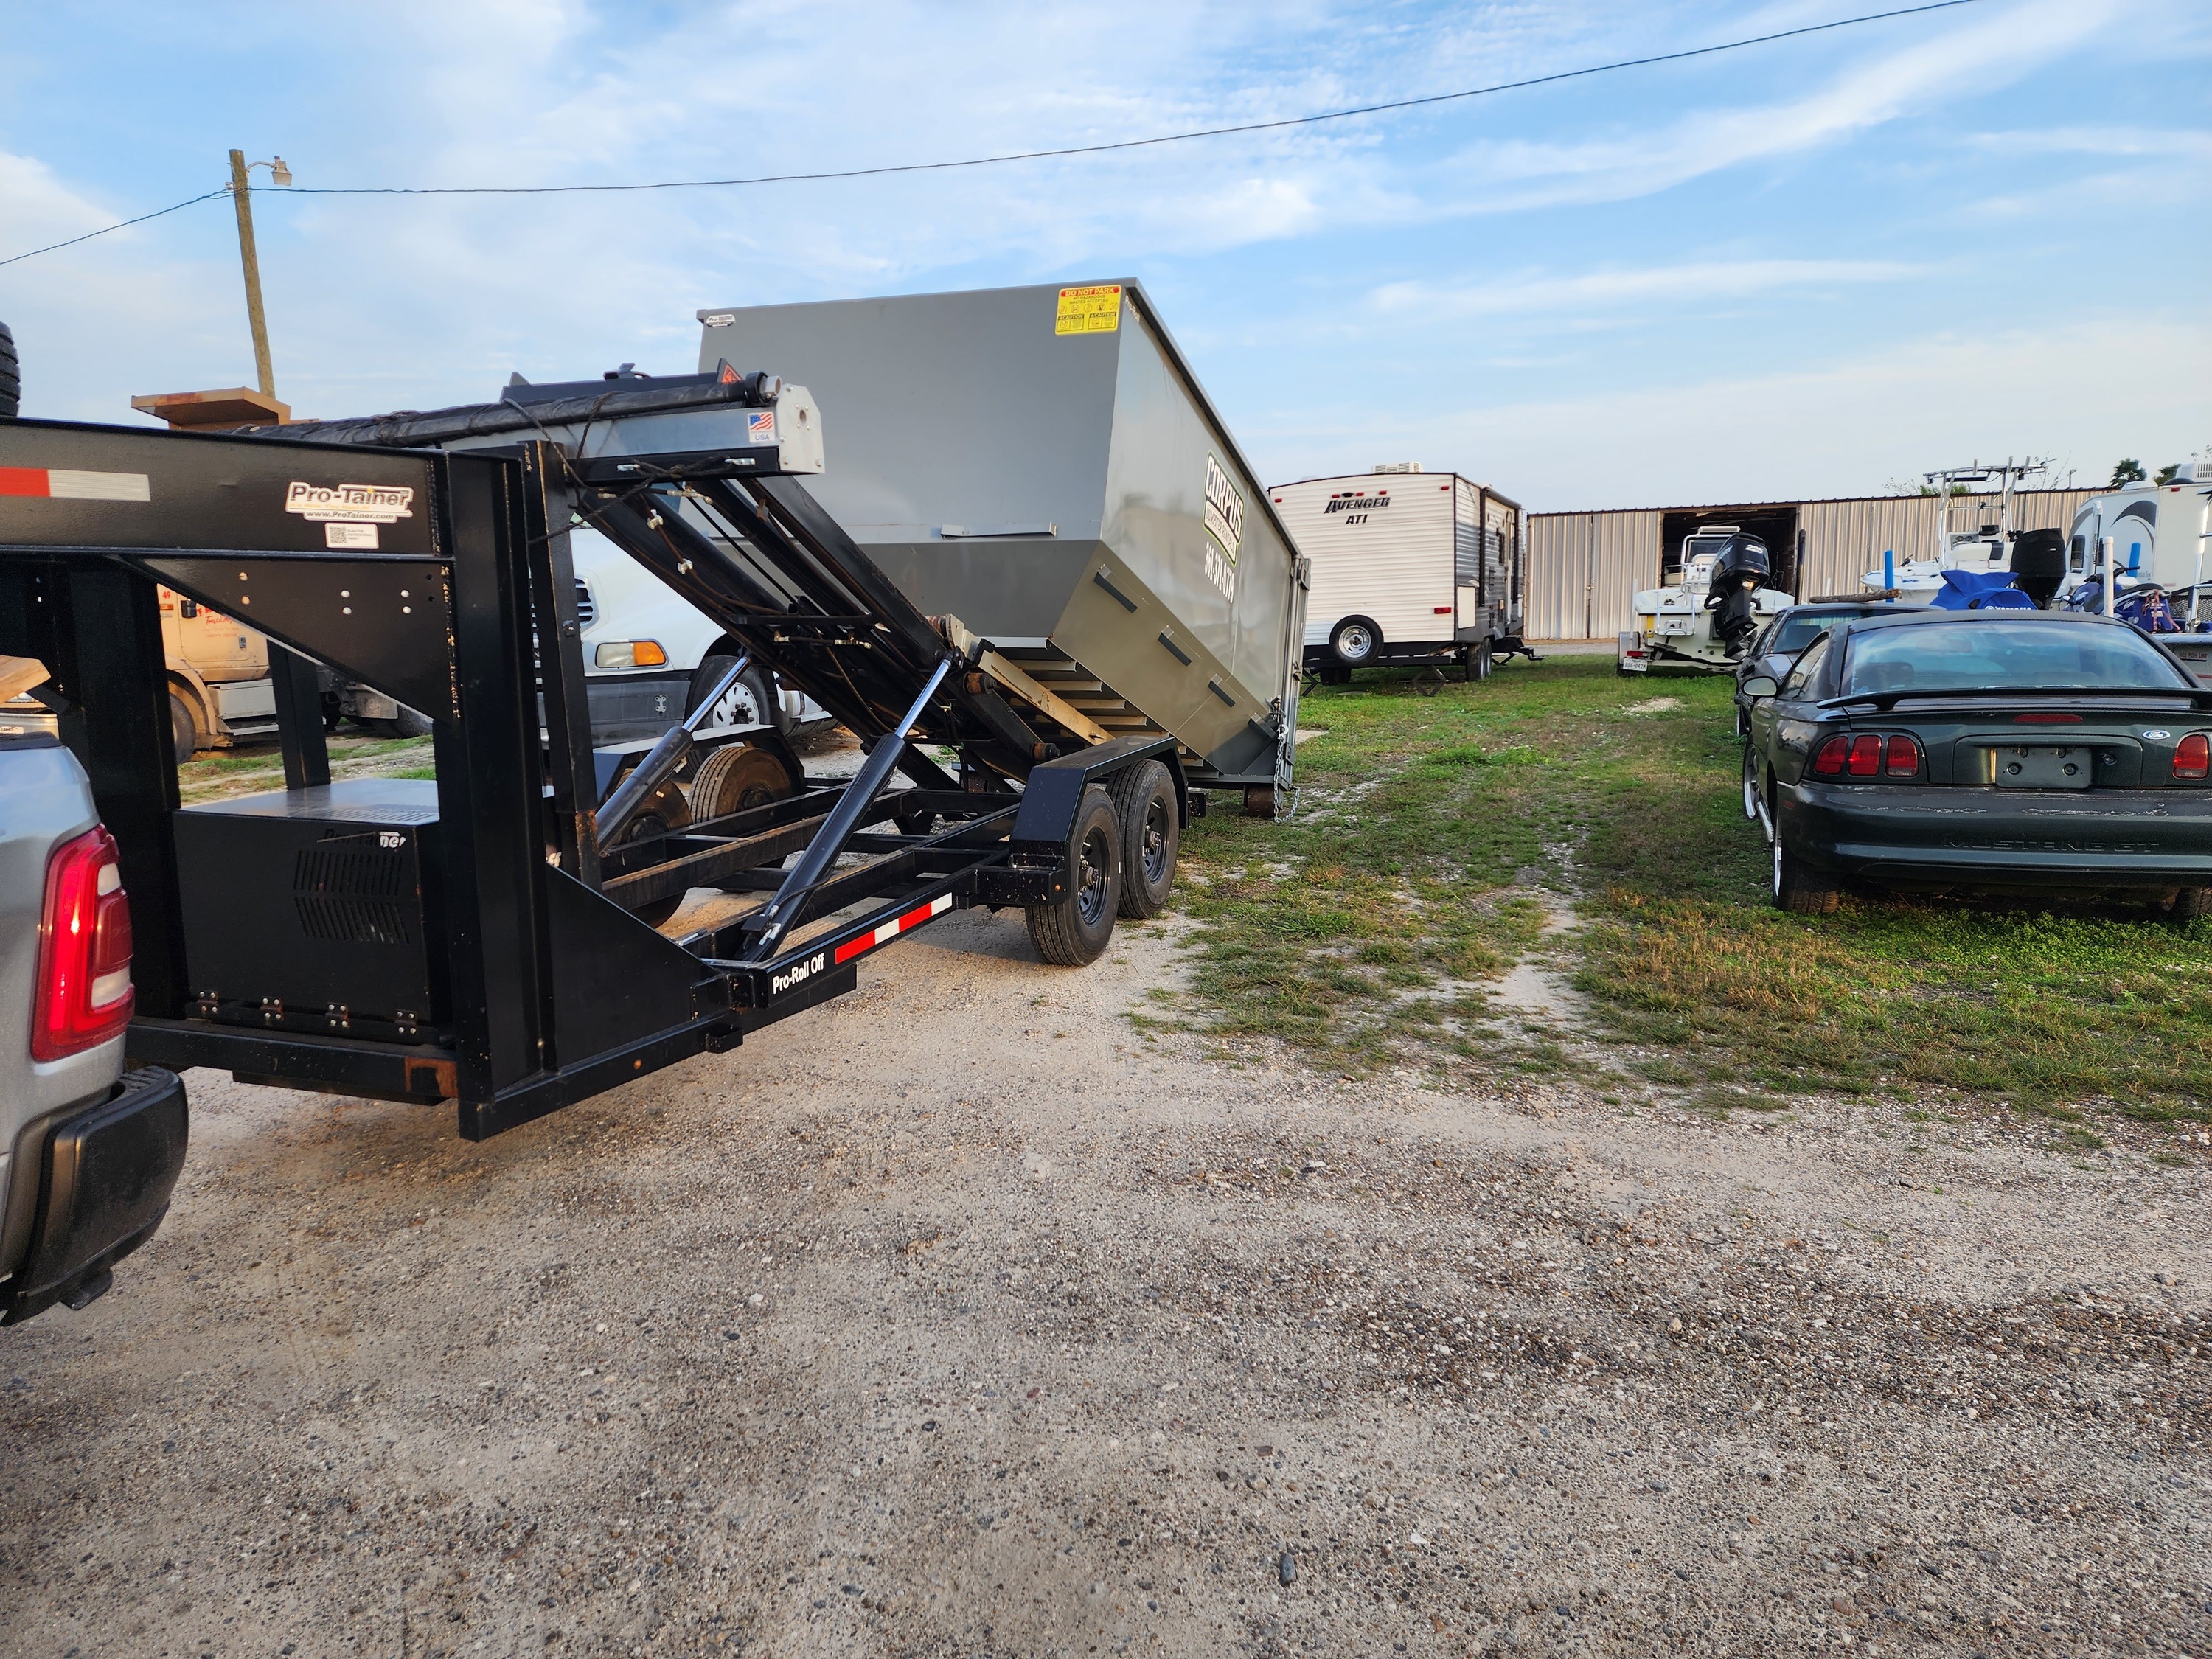 Book a Corpus Christi Dumpster Rental Online With a Few Easy Clicks!